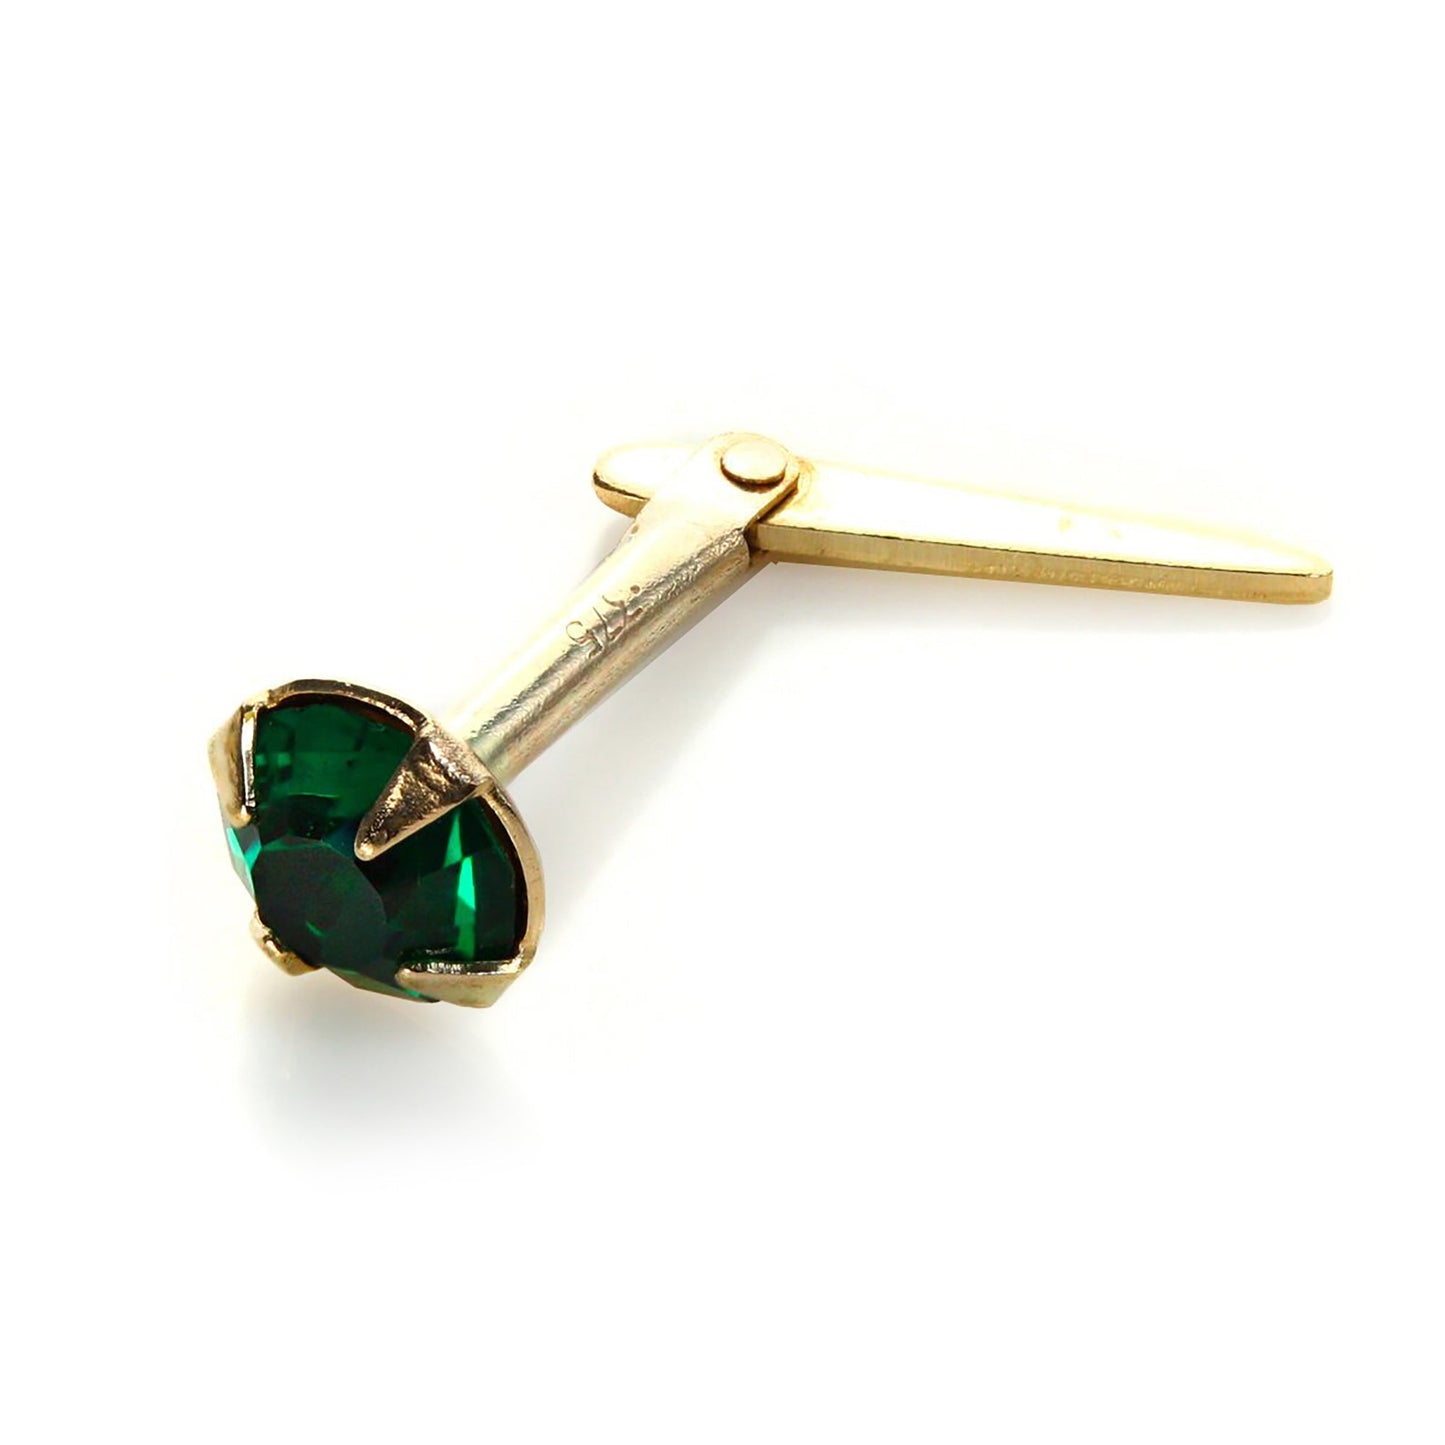 Andralok 9ct Yellow Gold Crystal 3.5mm Nose Stud